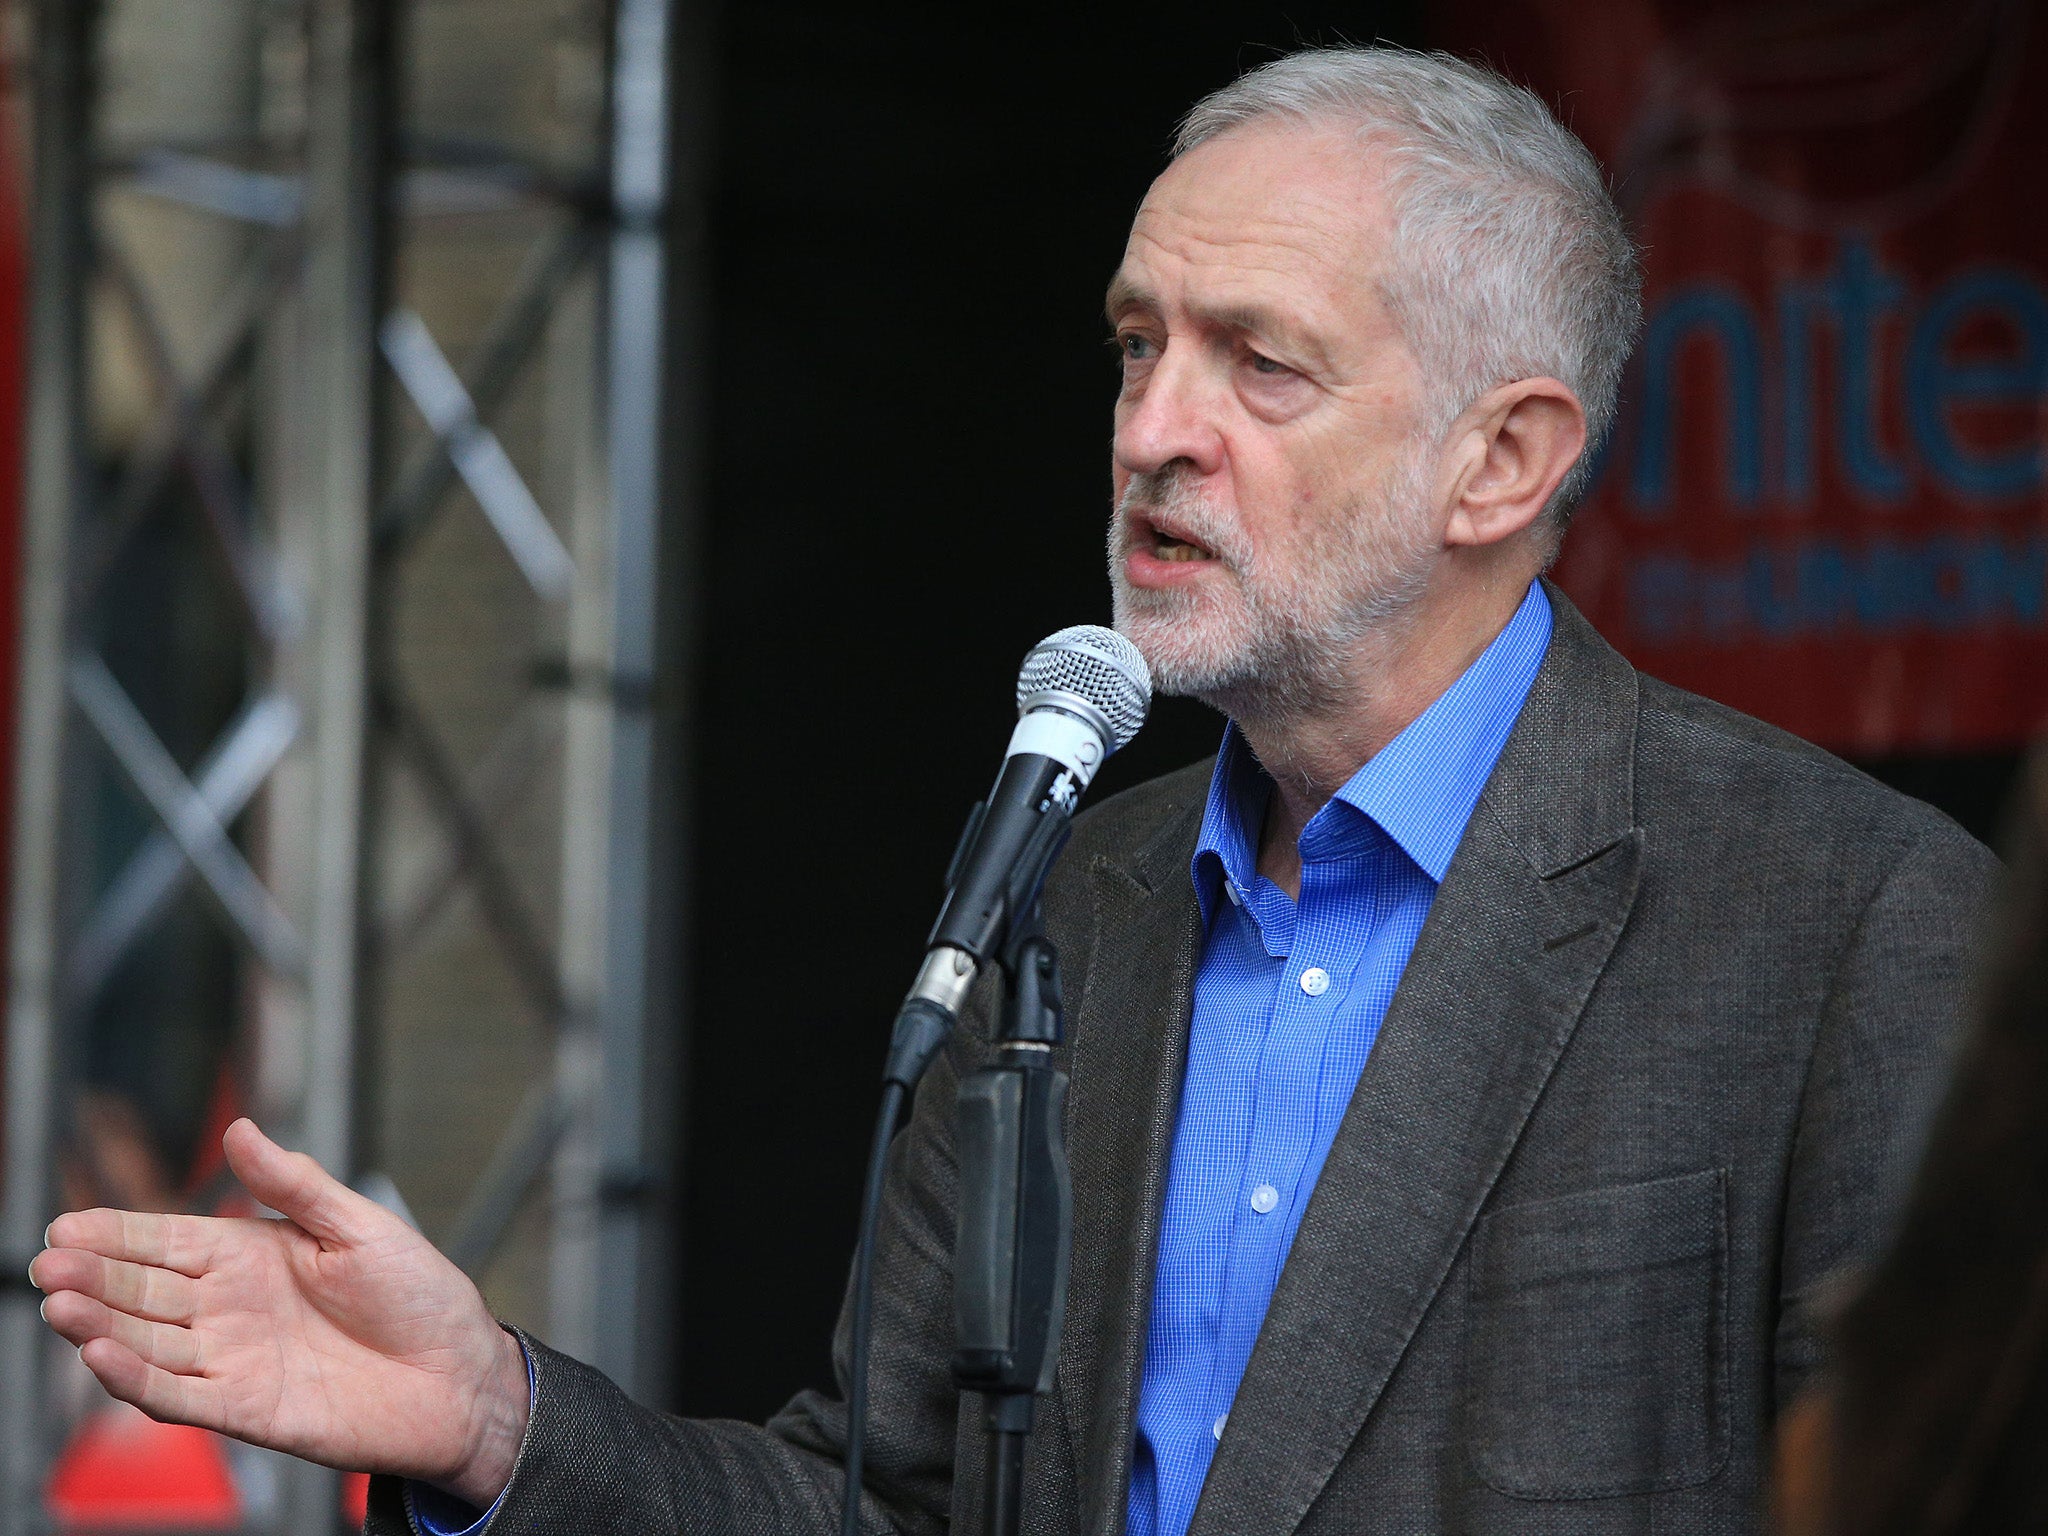 Jeremy Corbyn will speak at the conference in Prague